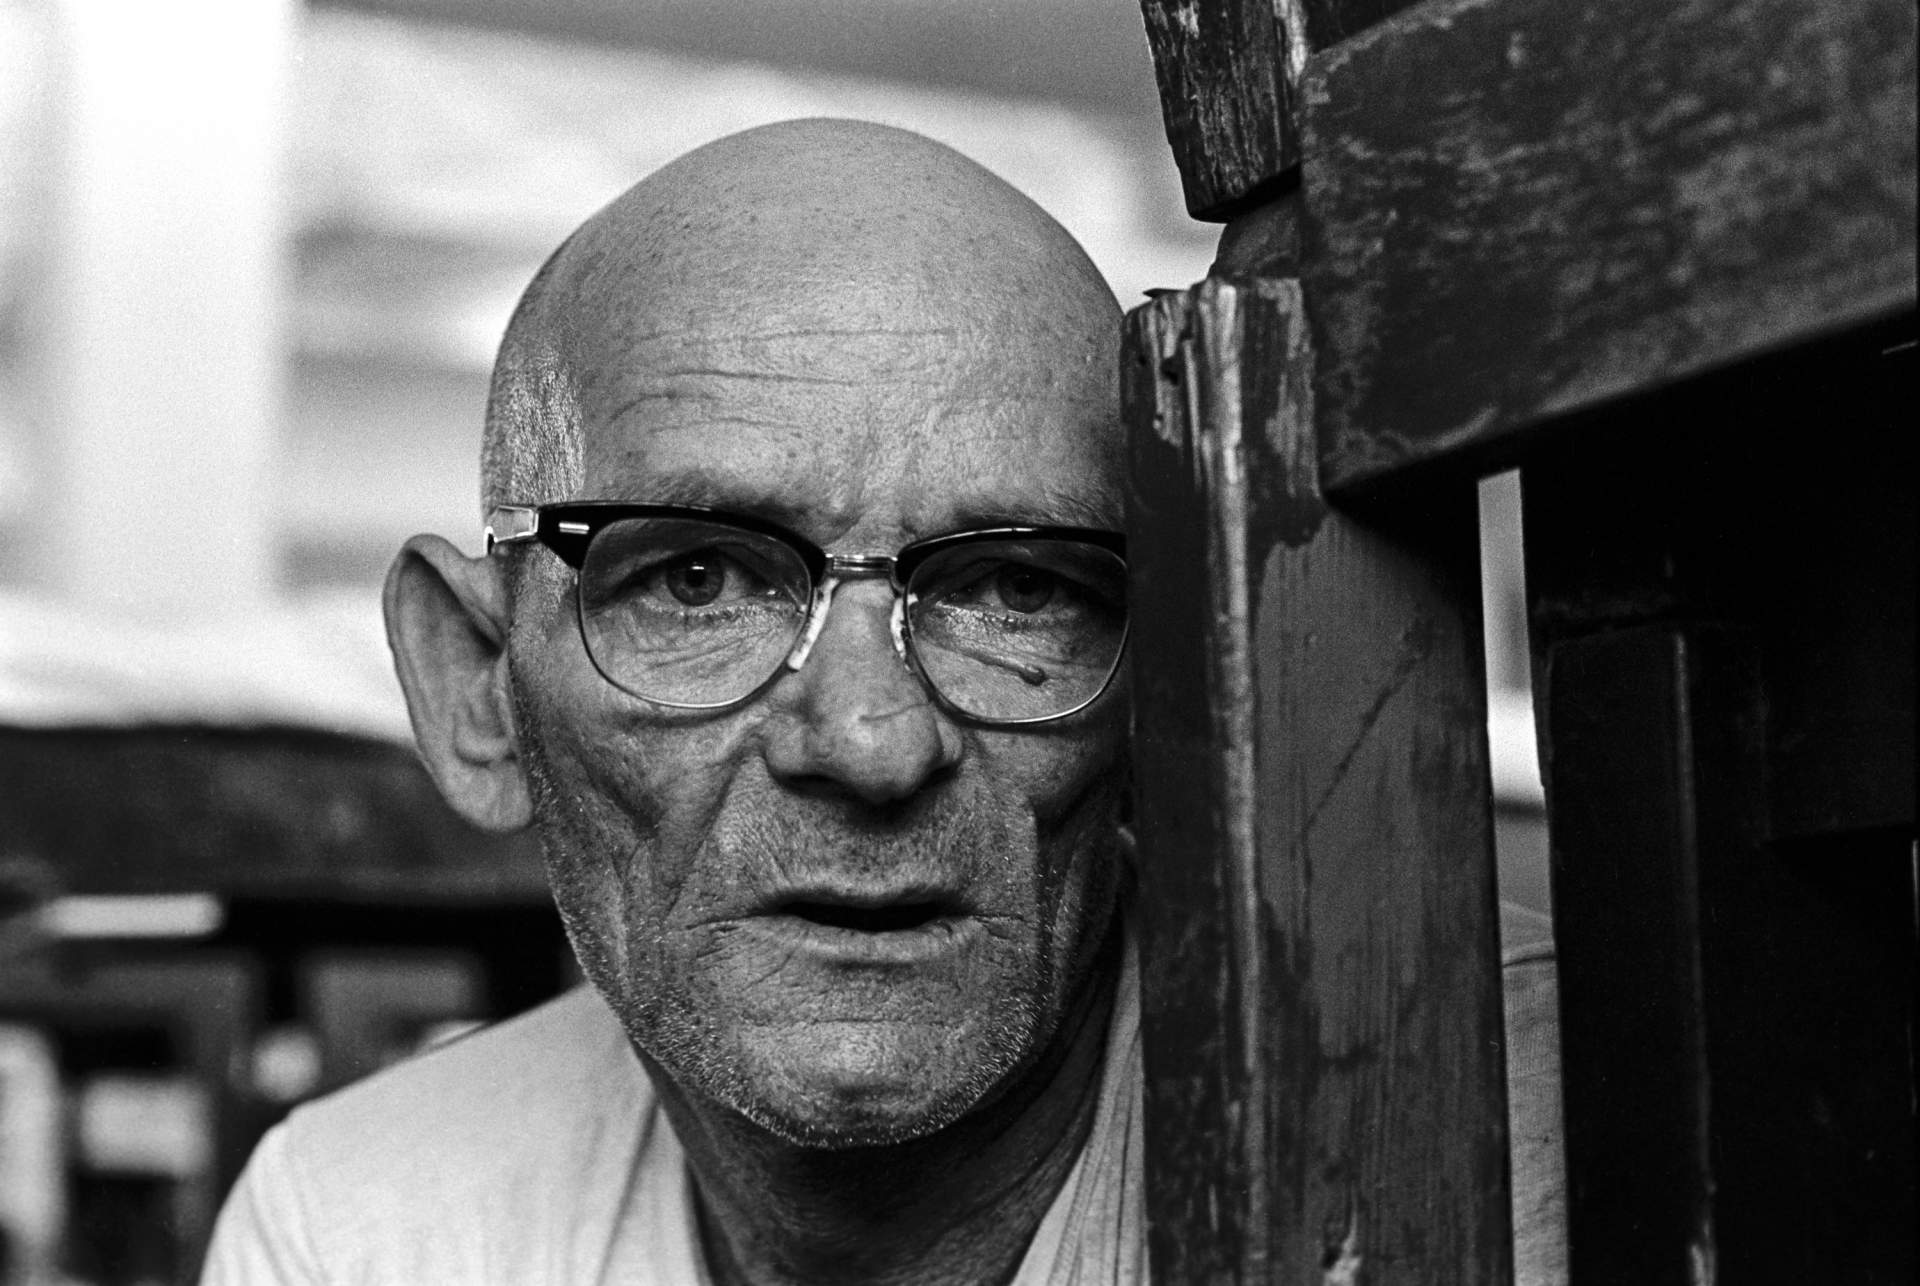 Bruce Jackson Being There: Michel Foucault & the Arkansas convict